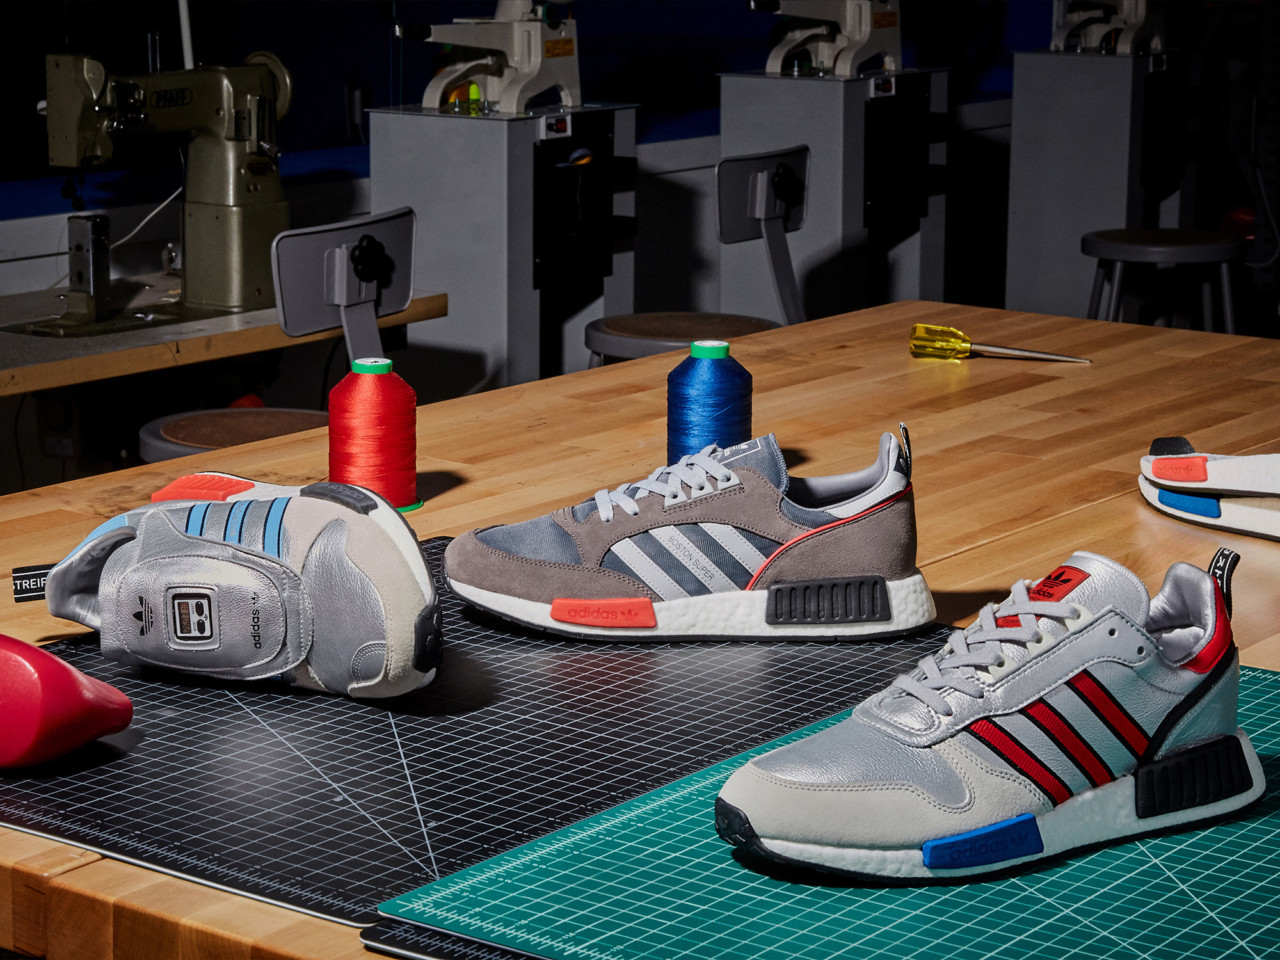 adidas Originals Never Made Collection Connects Past to Present